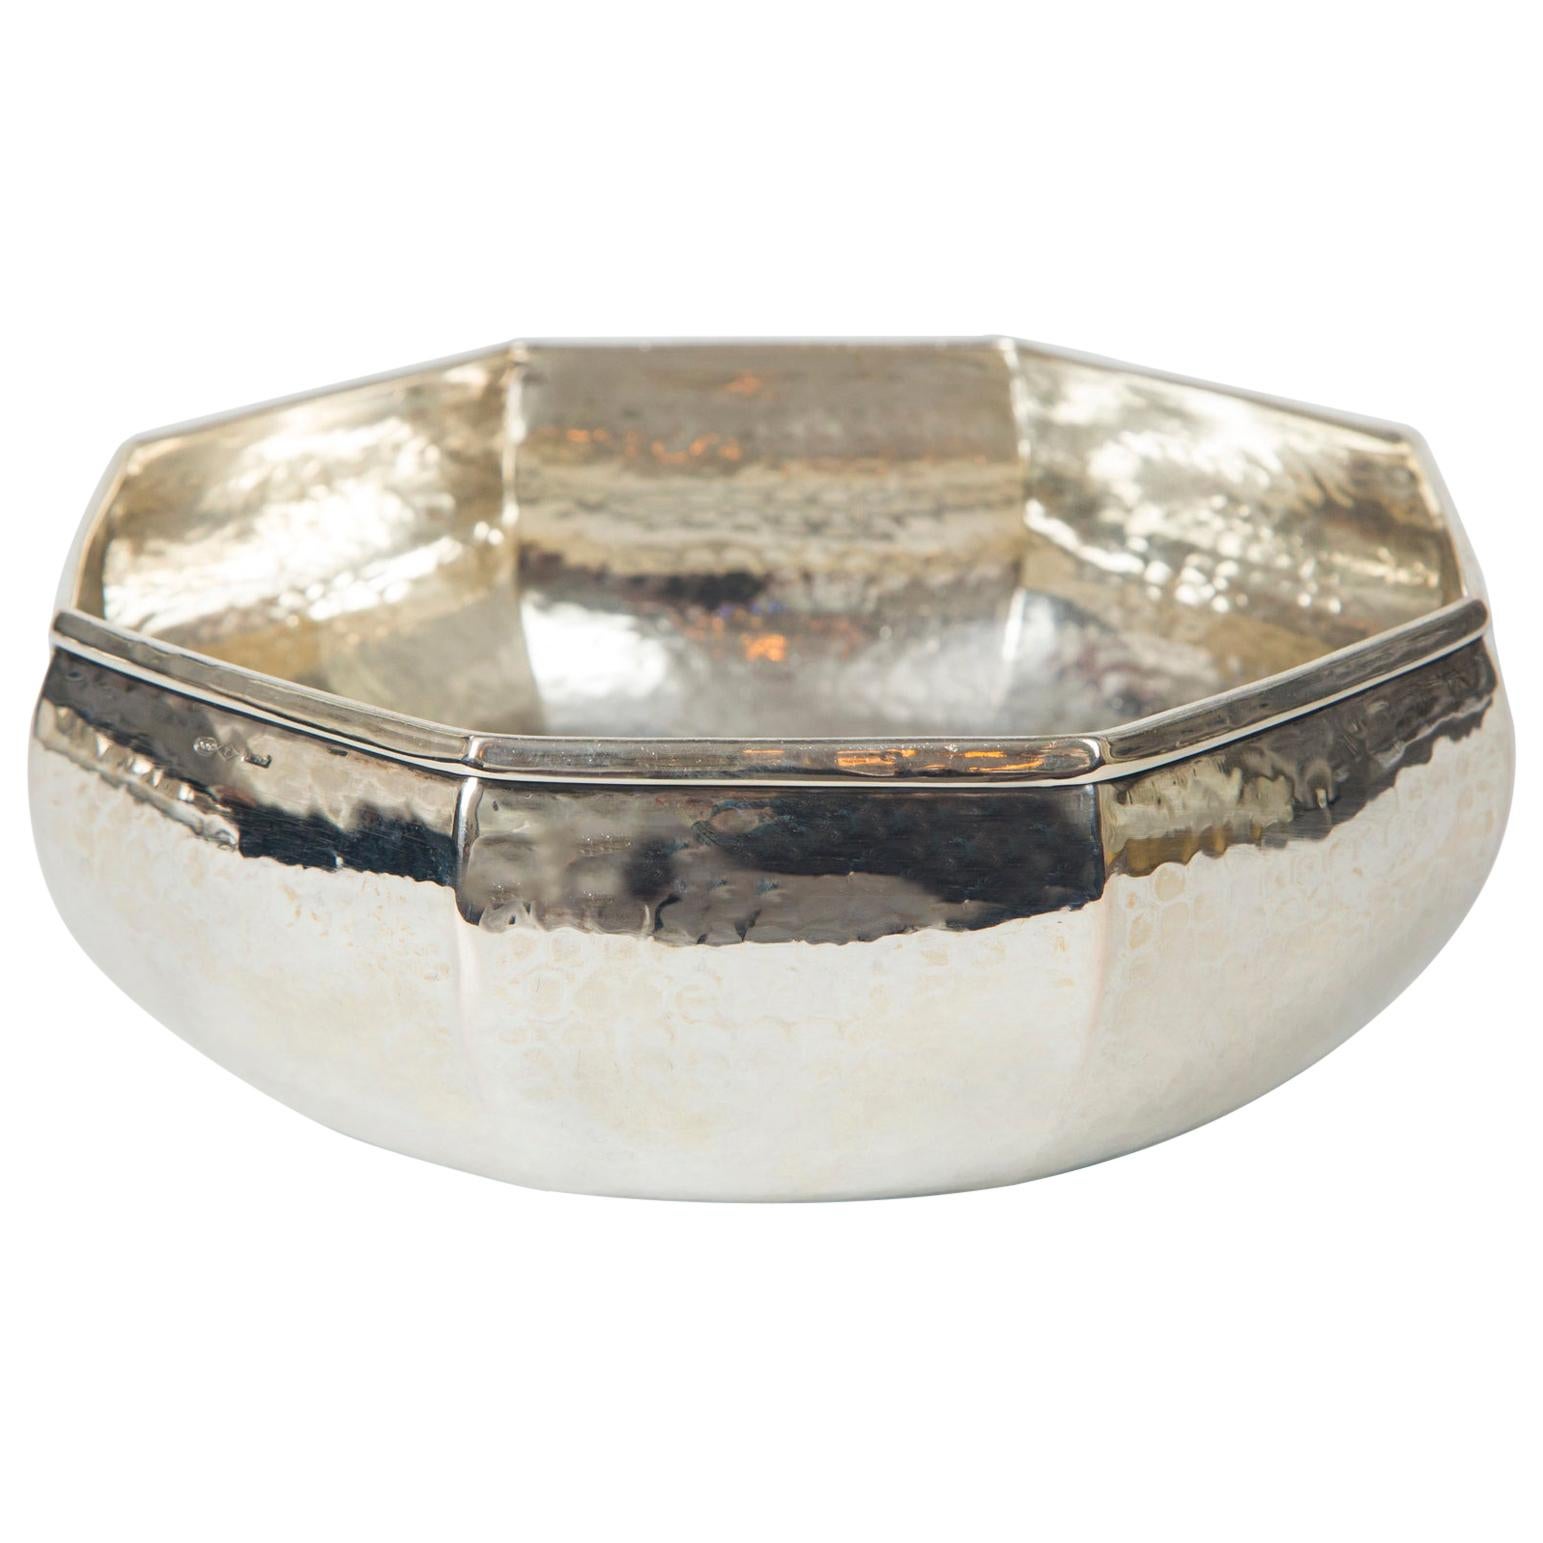 Hand-Hammered Octagonal Bowl, .800 Silver, Italy, Late 20th Century